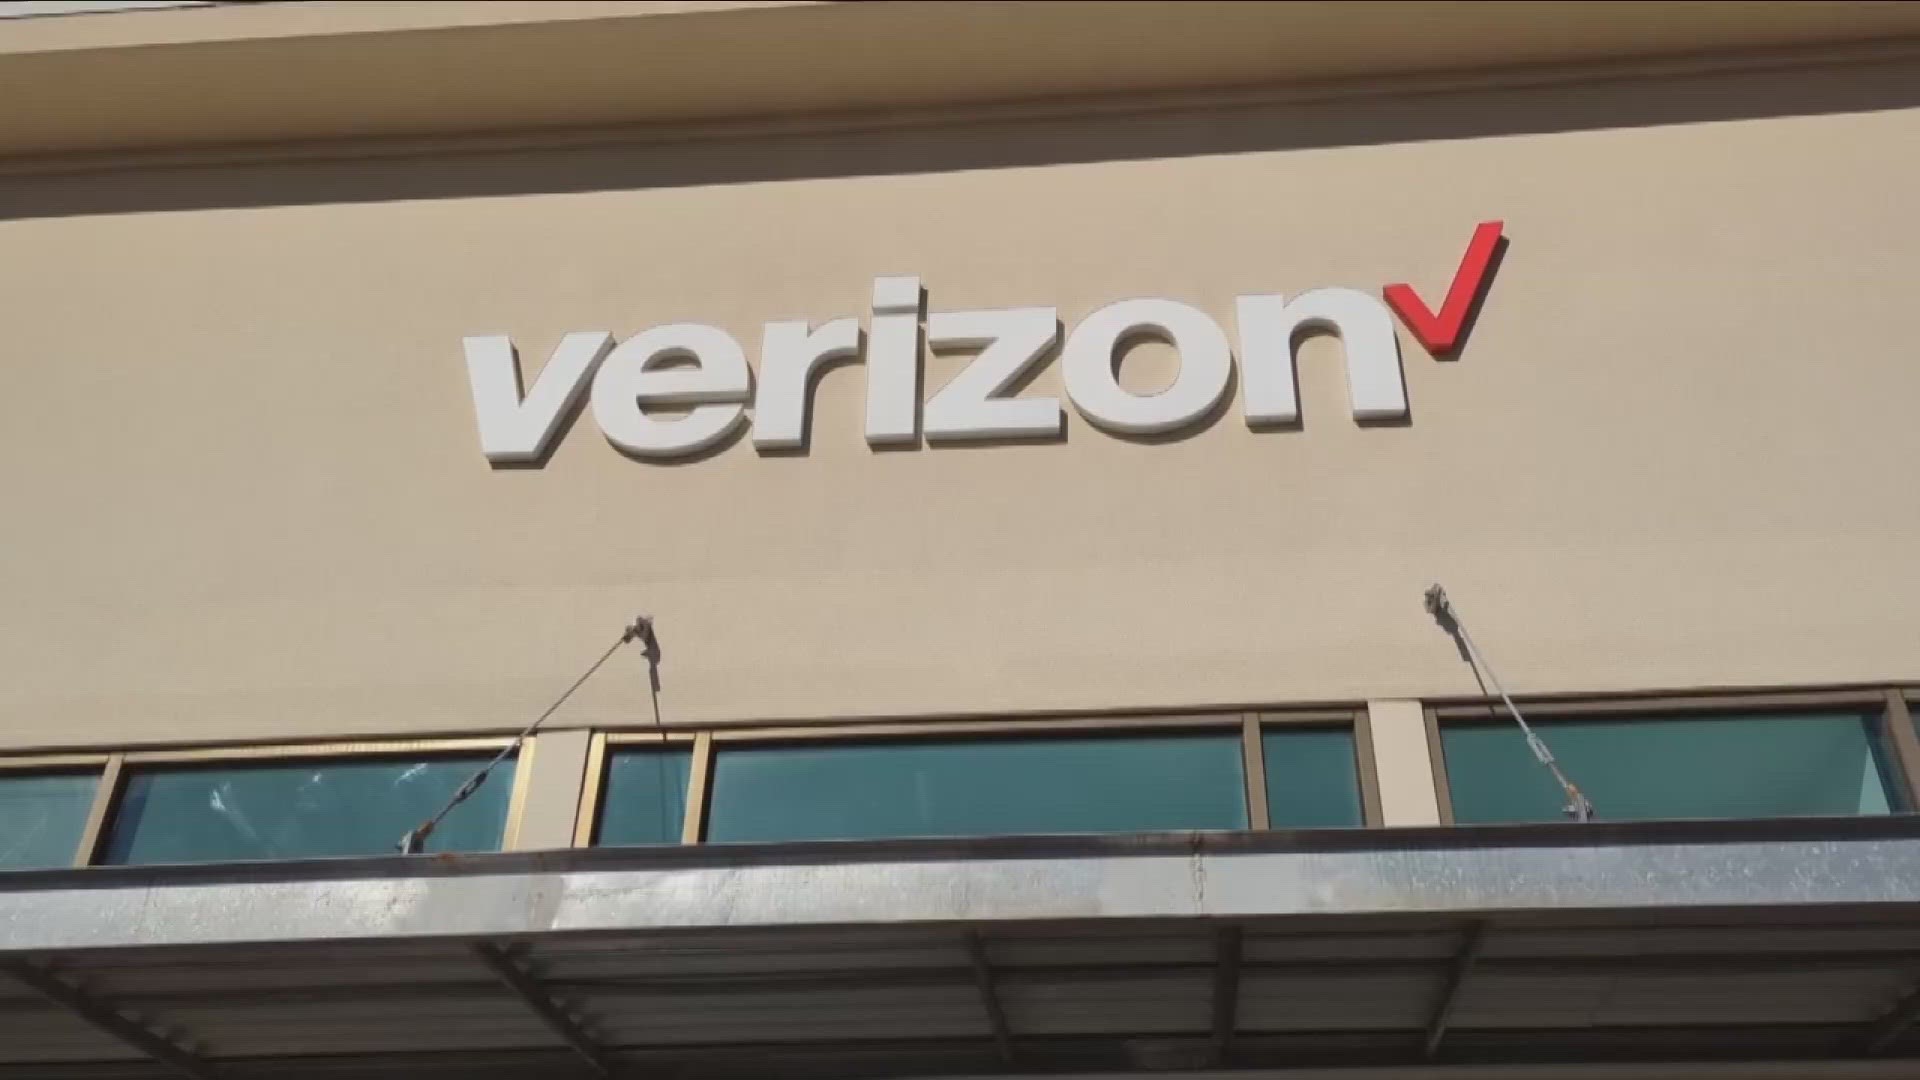 Verizon says the upgrades mean more than 1 million people in Western New York will now have 5G service.